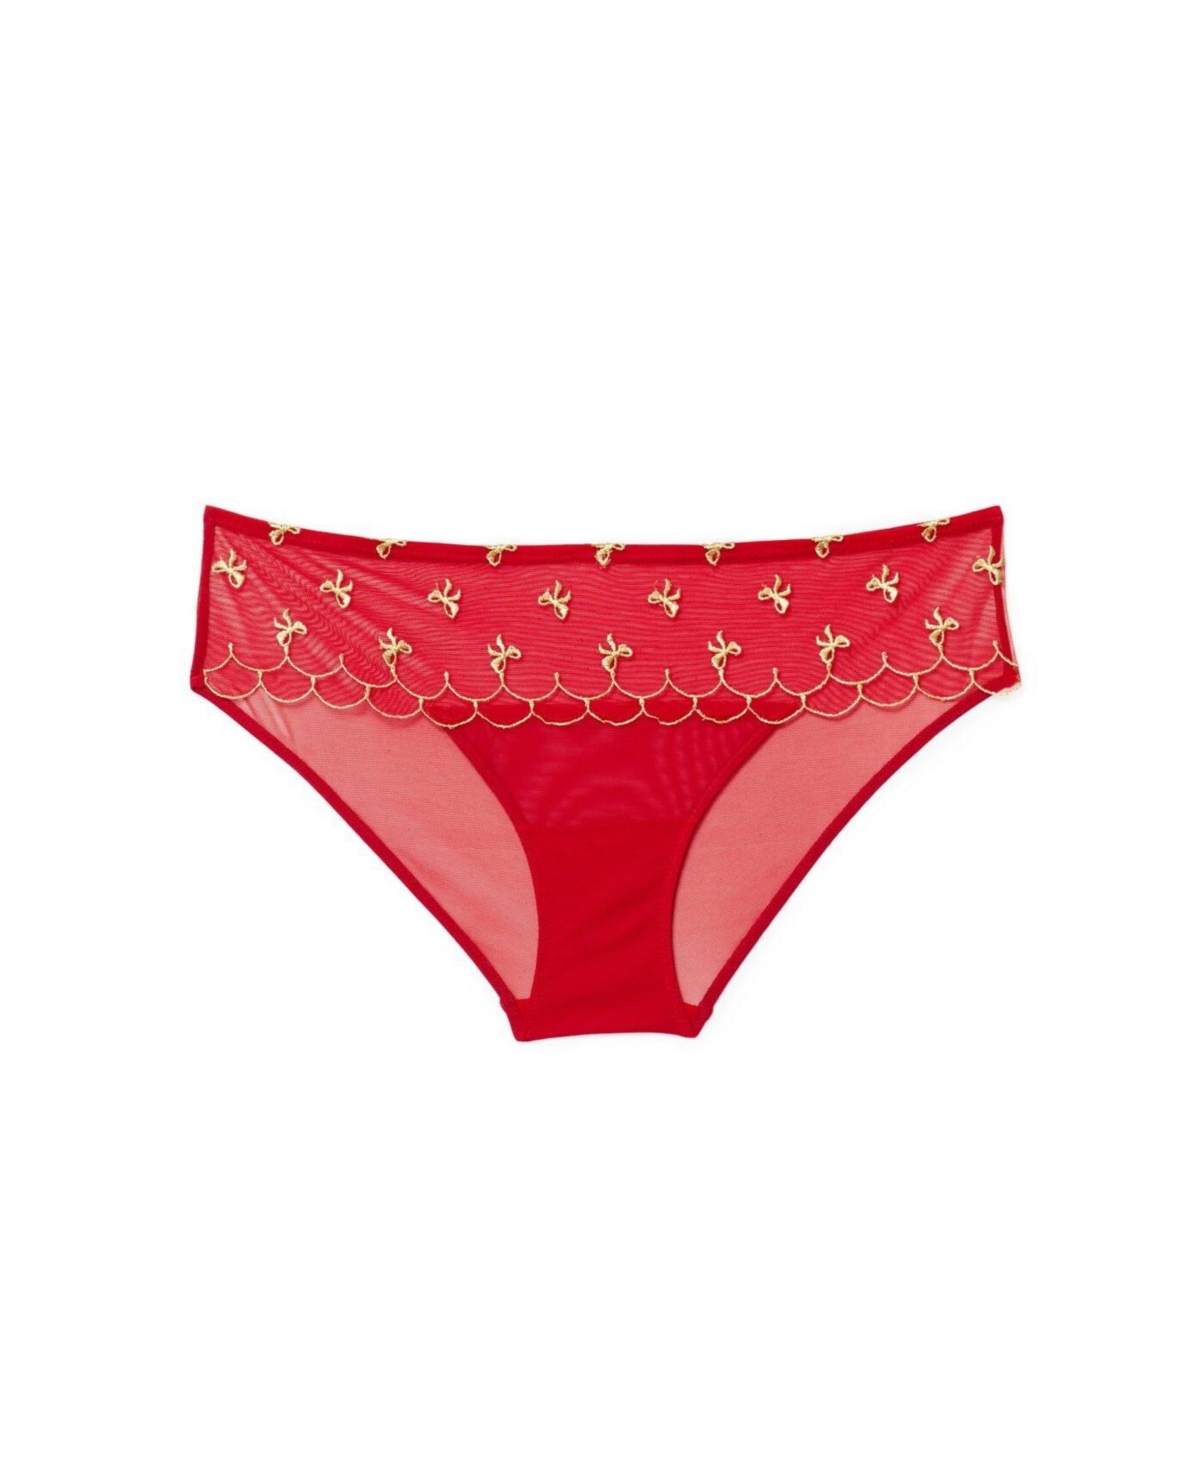 Women's Bettie Hipster Panty - Holidays Edition! - Dark red